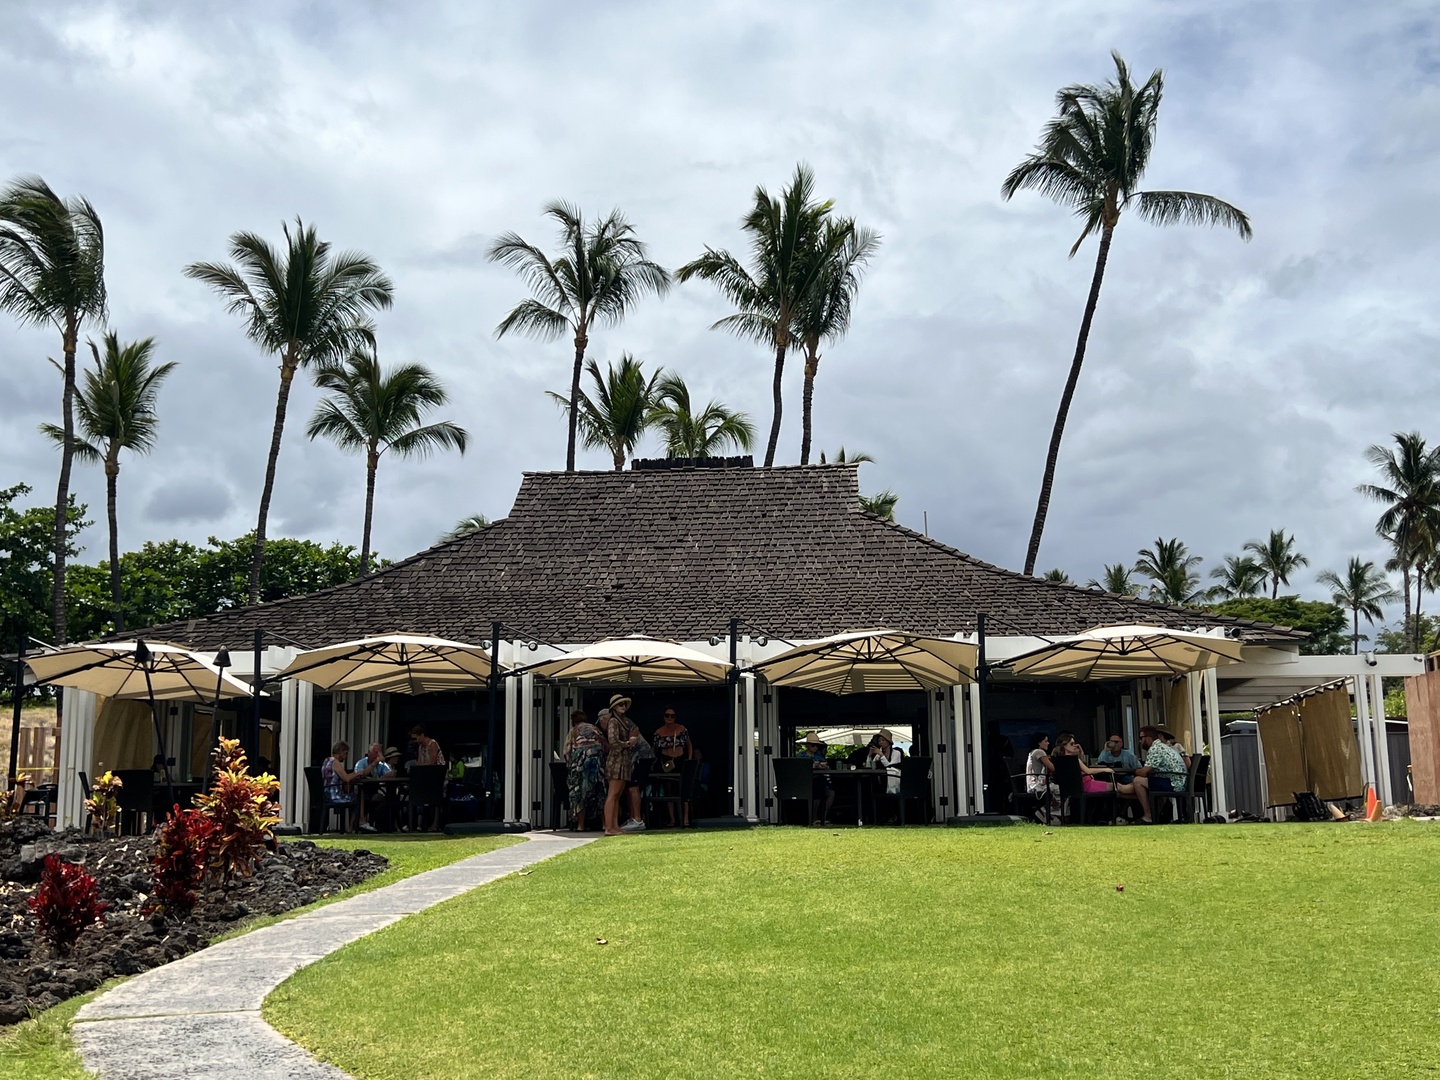 Kamuela Vacation Rentals, The Islands D3 - Dine Amidst the Breezes at Our Open-Air Beachside Restaurant, Where the Waves Serenade Every Bite.